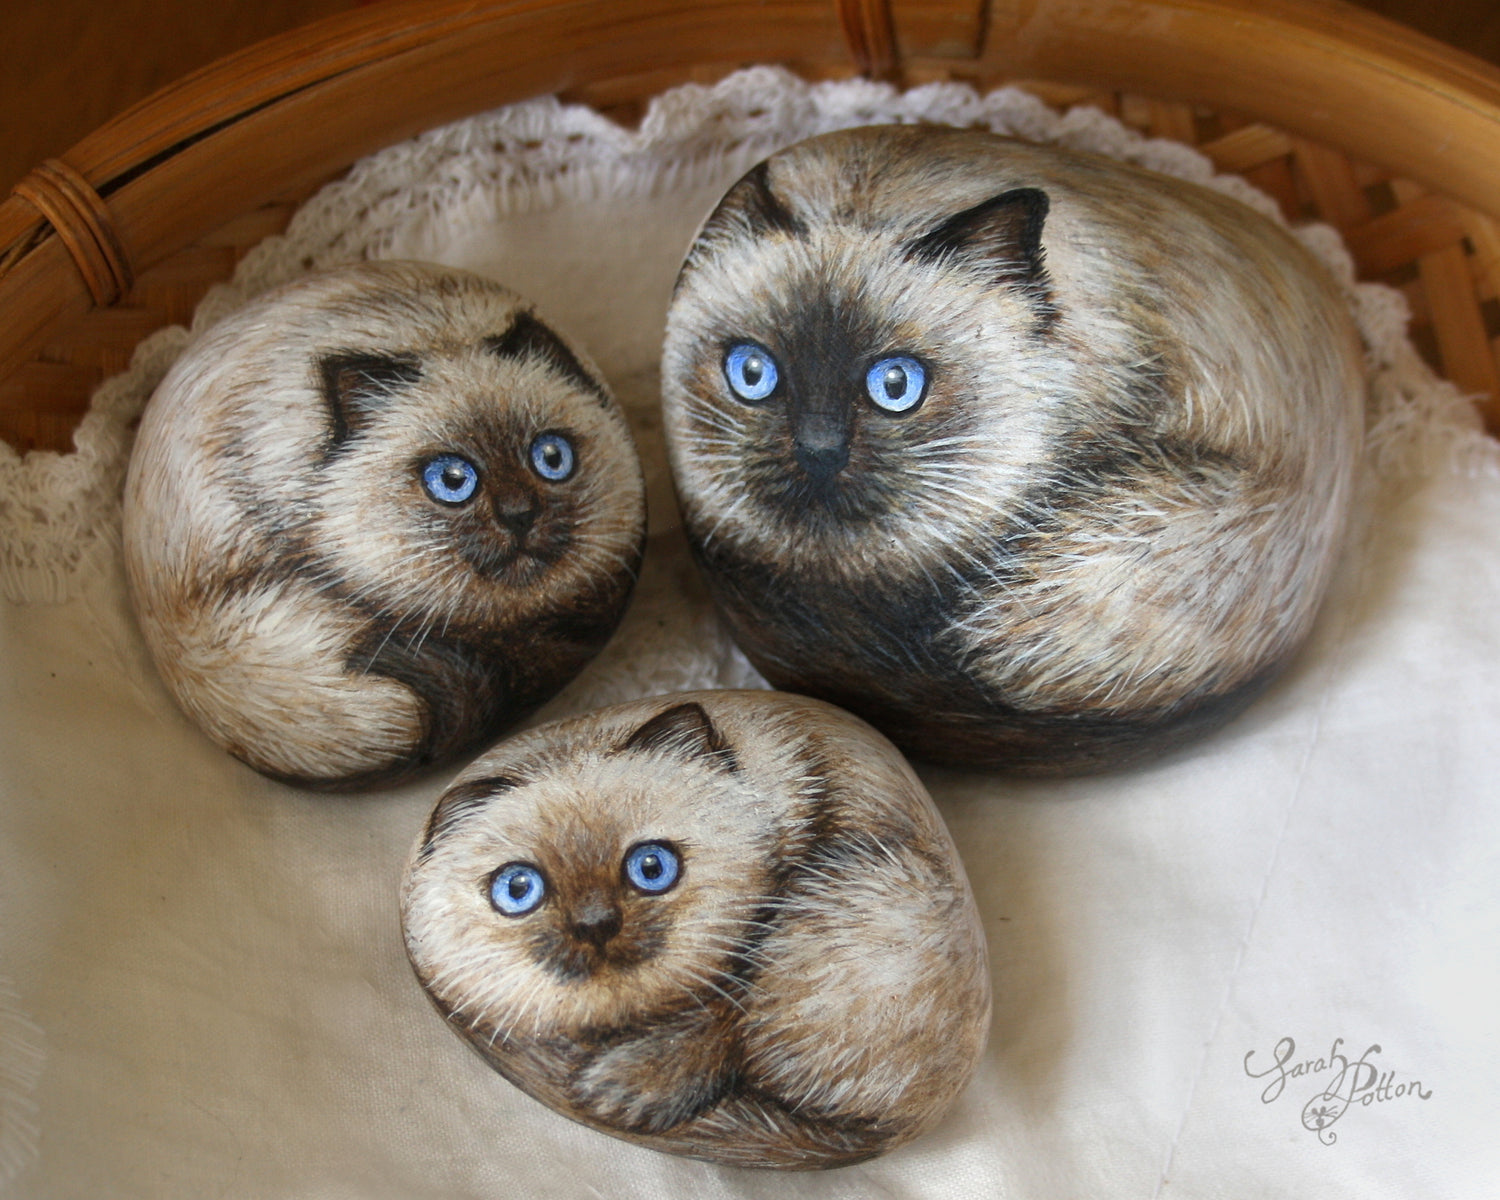 Painted Rocks for Sale in NZ - Animal Art on Stones